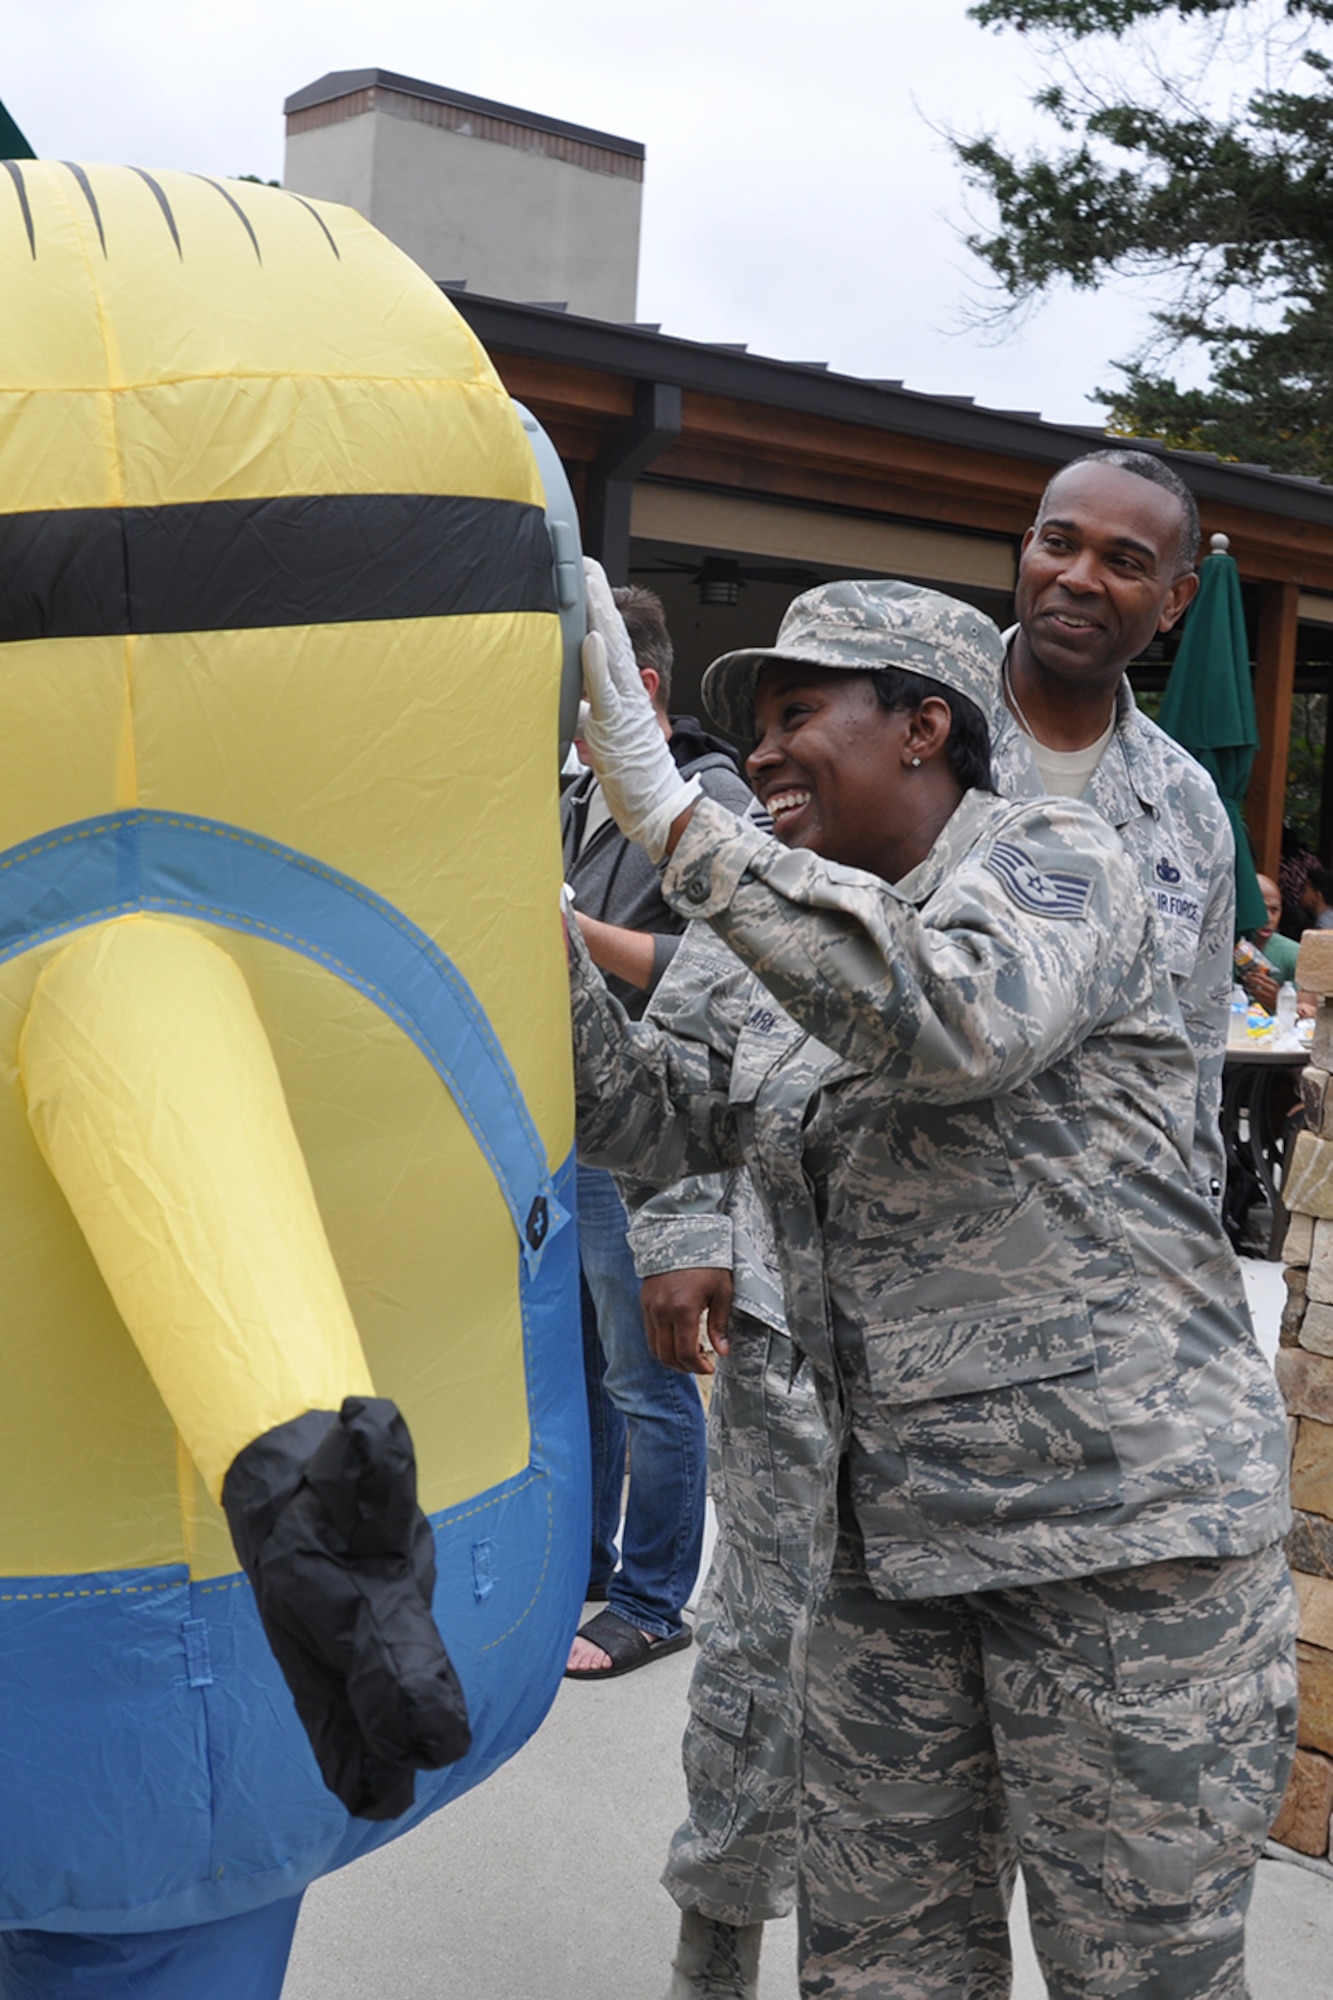 A Reserve Citizen Airman interacts with a mascot at this year's Family Day Oct. 14, 2017 at Dobbins Air Reserve Base, Ga. Family Day is held here annually as a way of bringing families on base to see what their Reserve Citizen Airmen do on drill weekends. (U.S. Air Force photo/Master Sgt. James Branch)